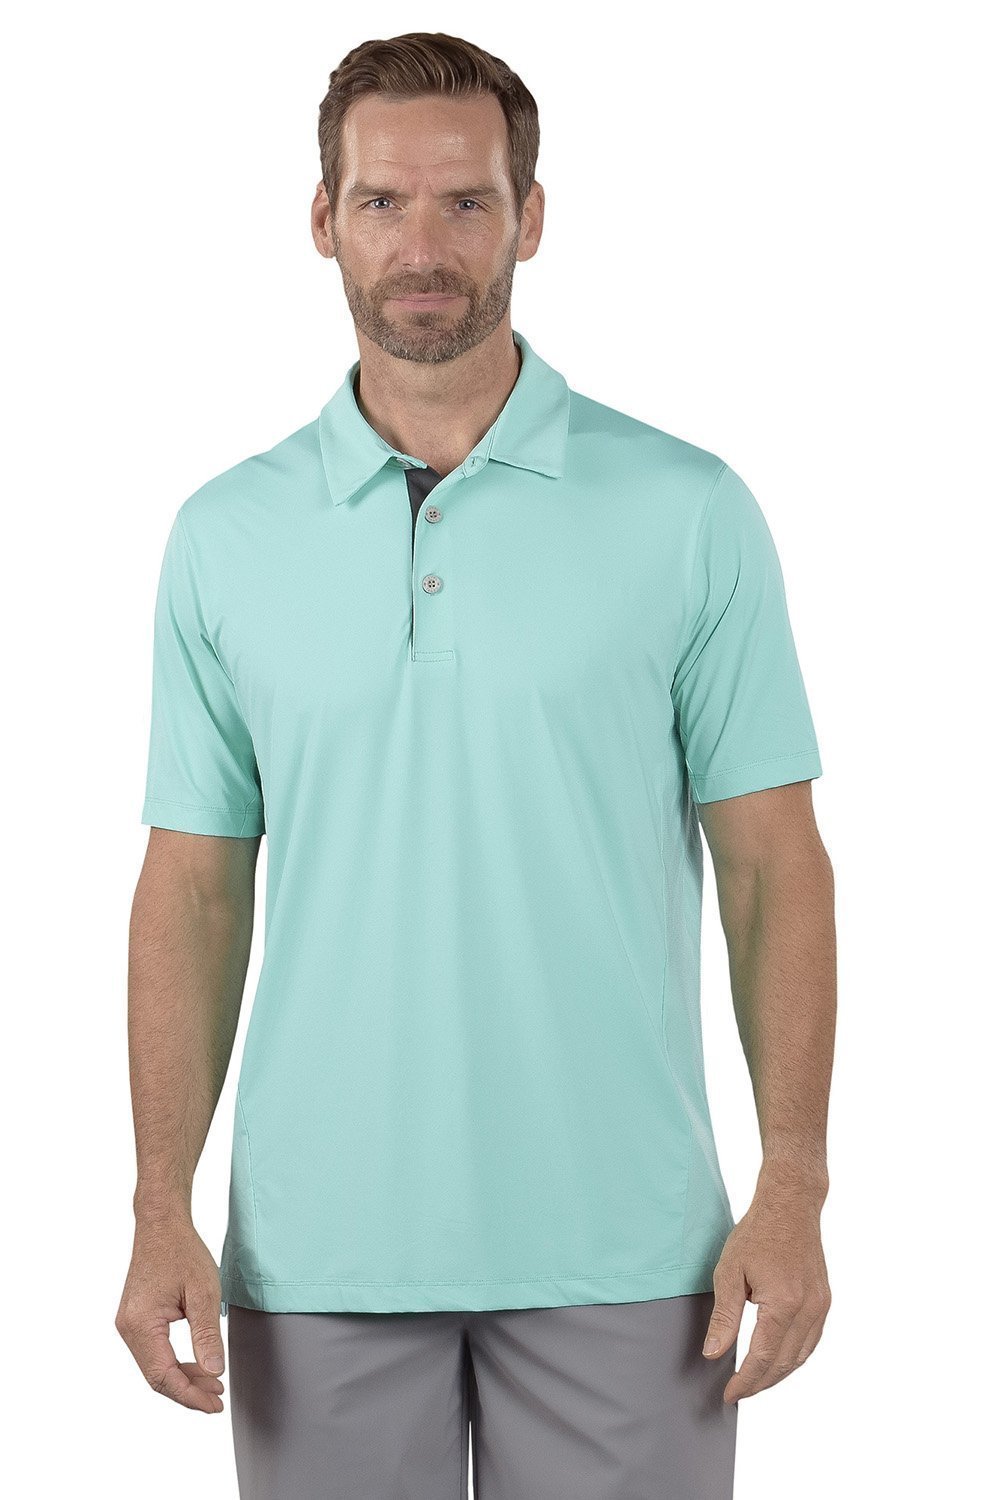 Toby Oasis Polo